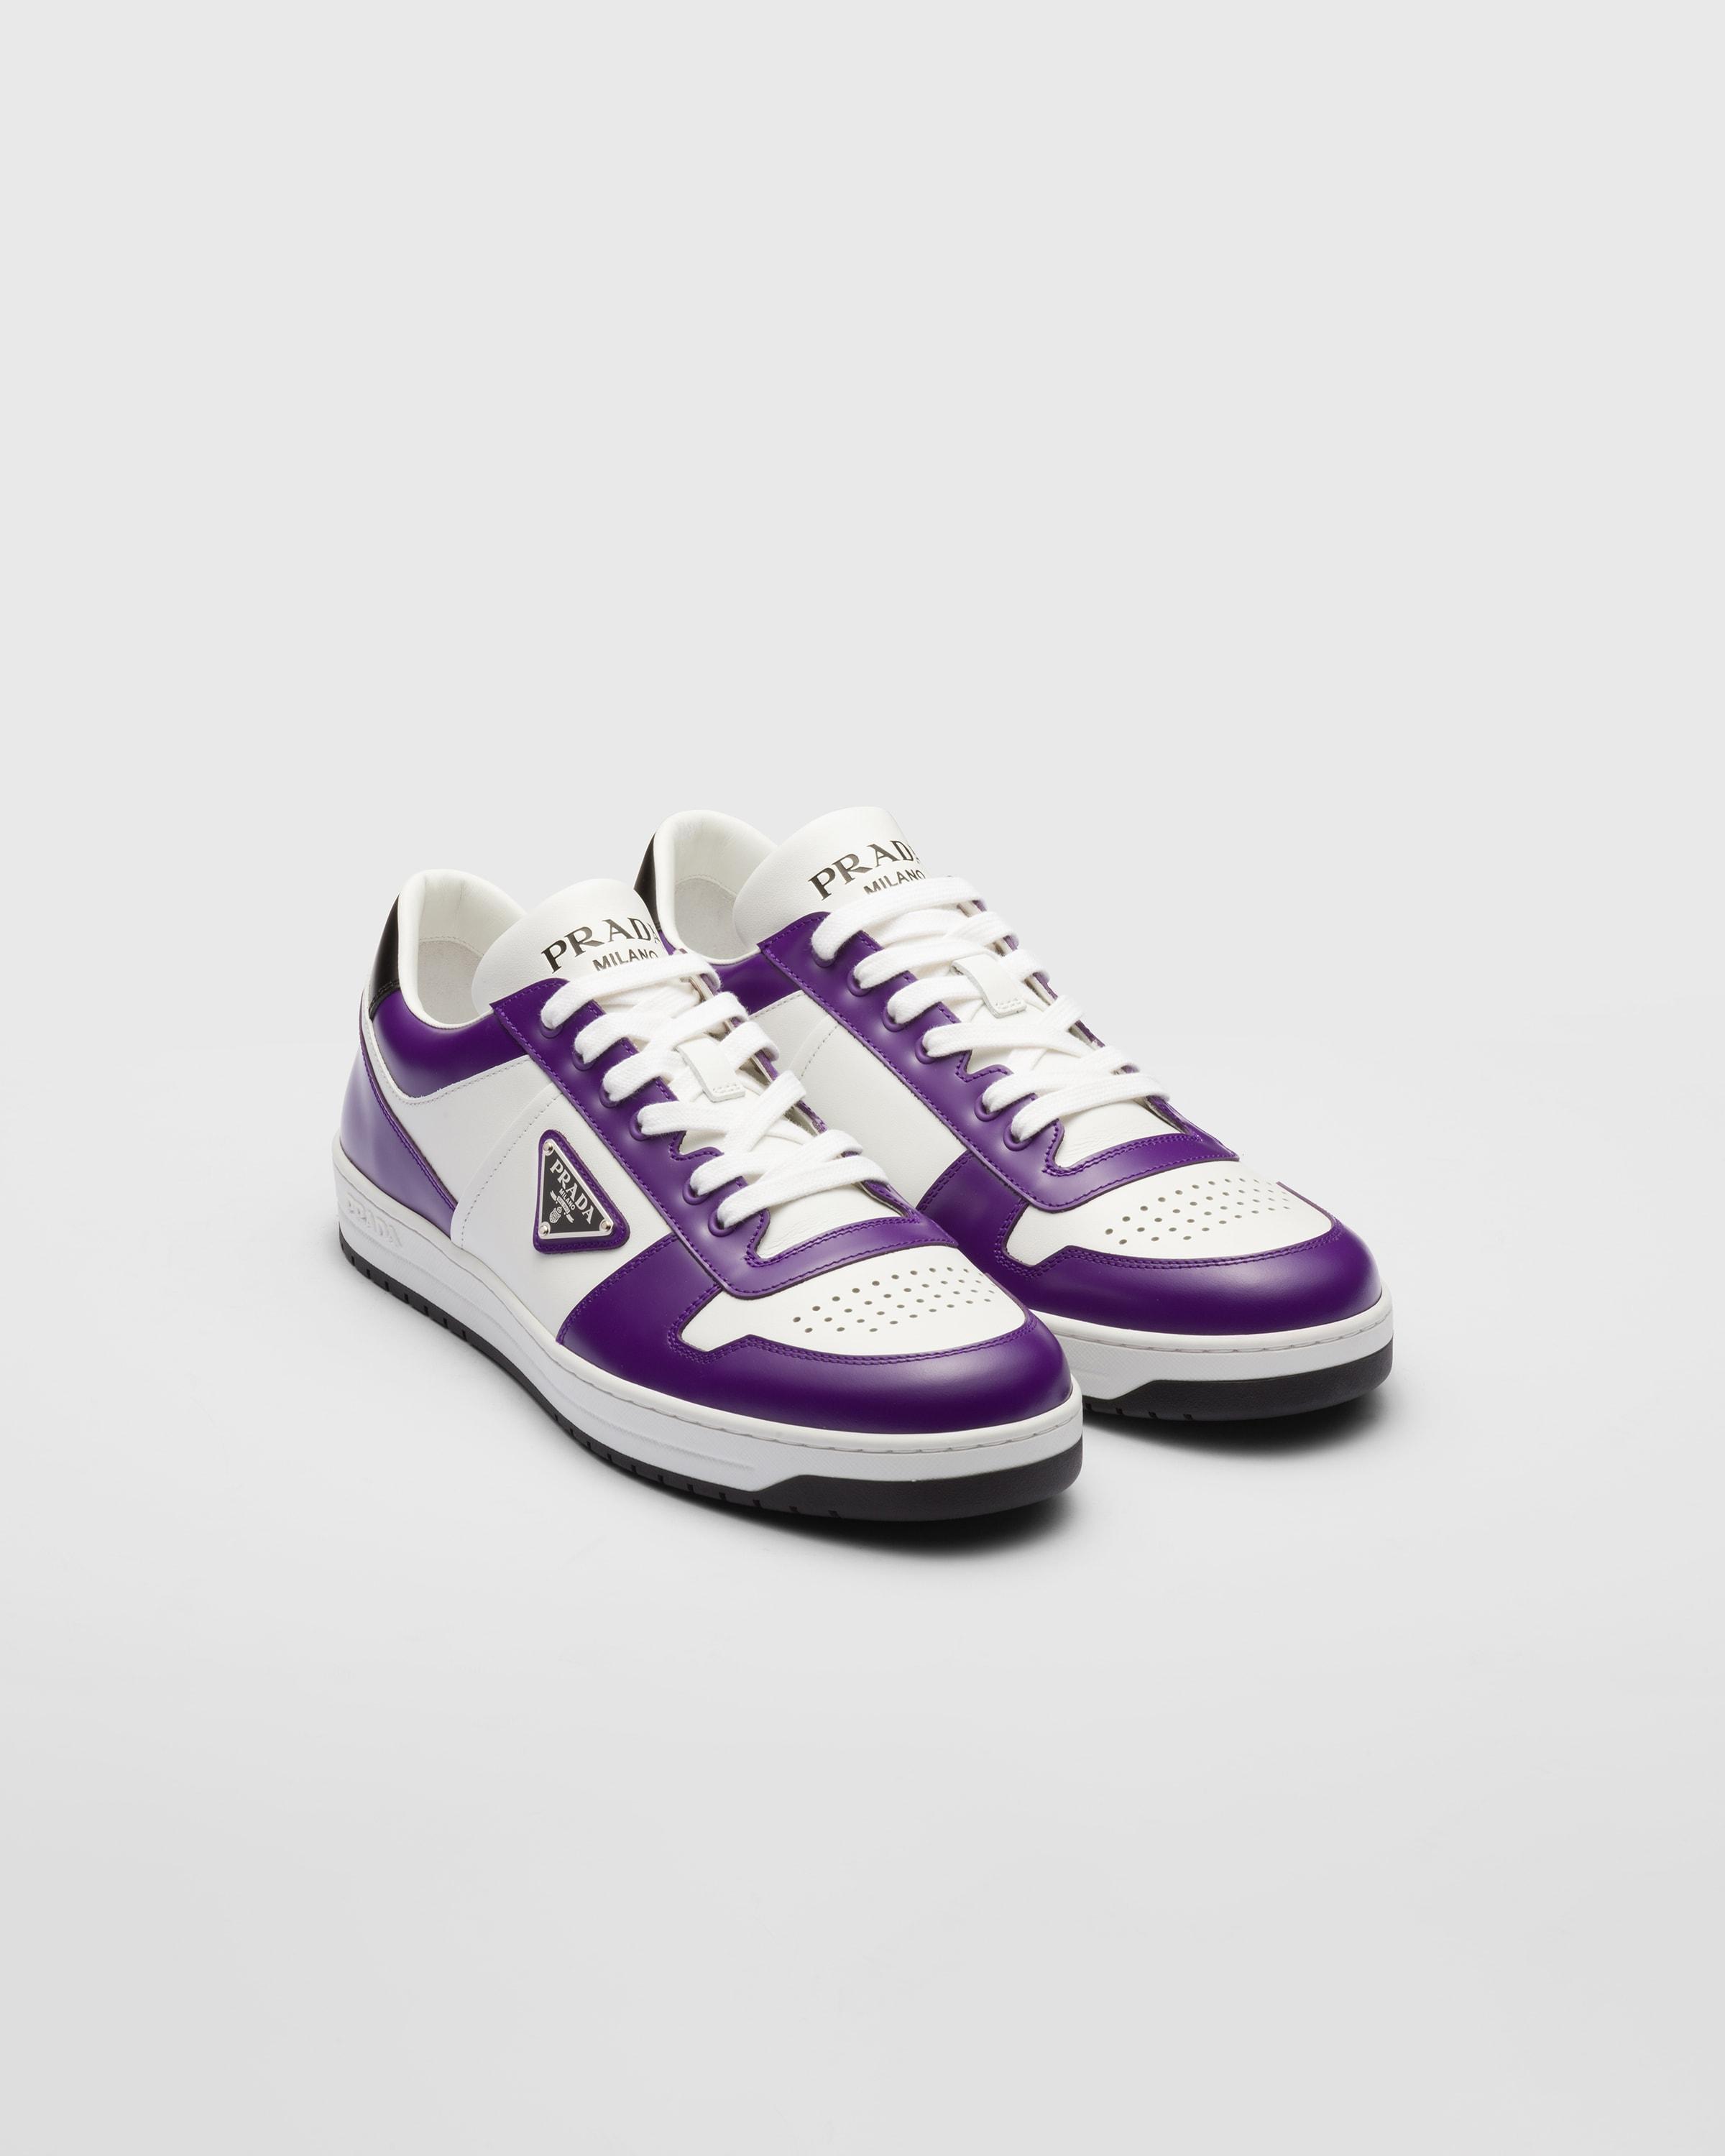 Prada Downtown Leather Sneakers in White for Men | Lyst